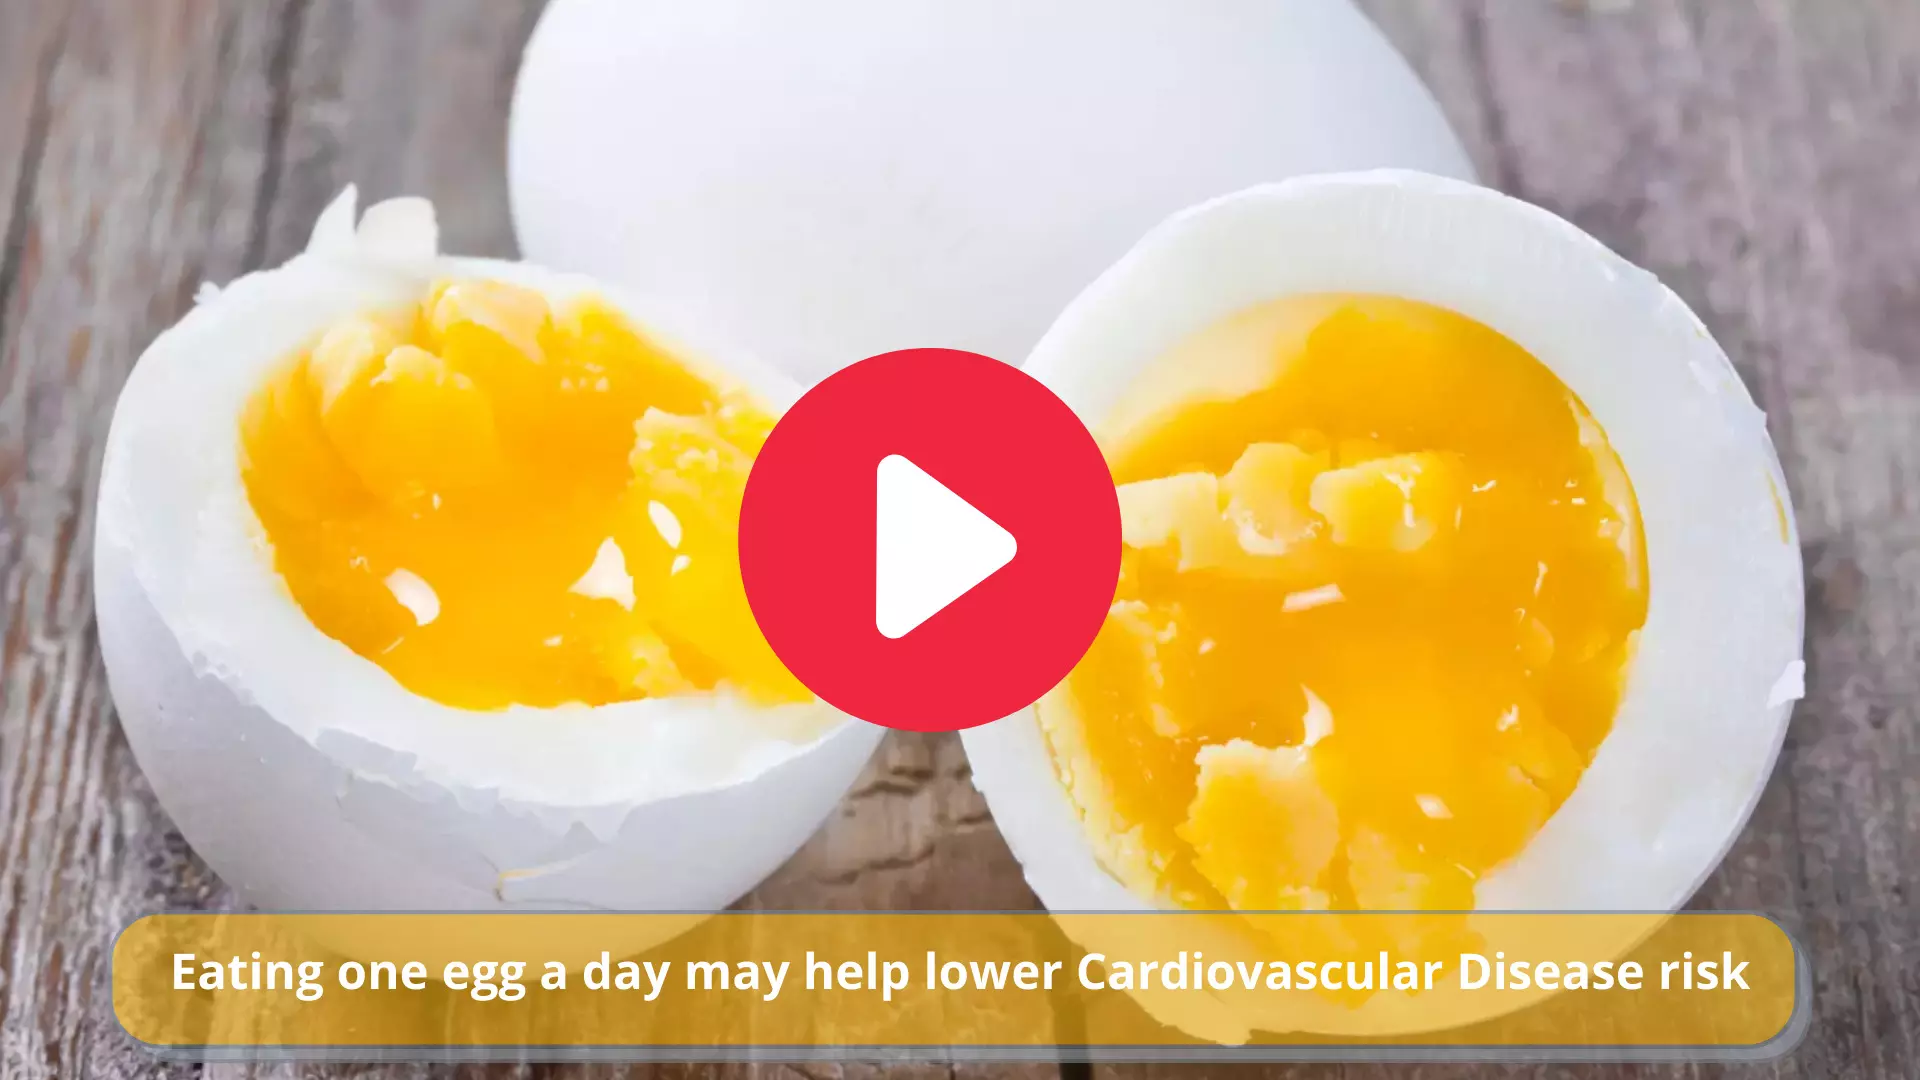 Eating one egg a day may help lower Cardiovascular Disease risk